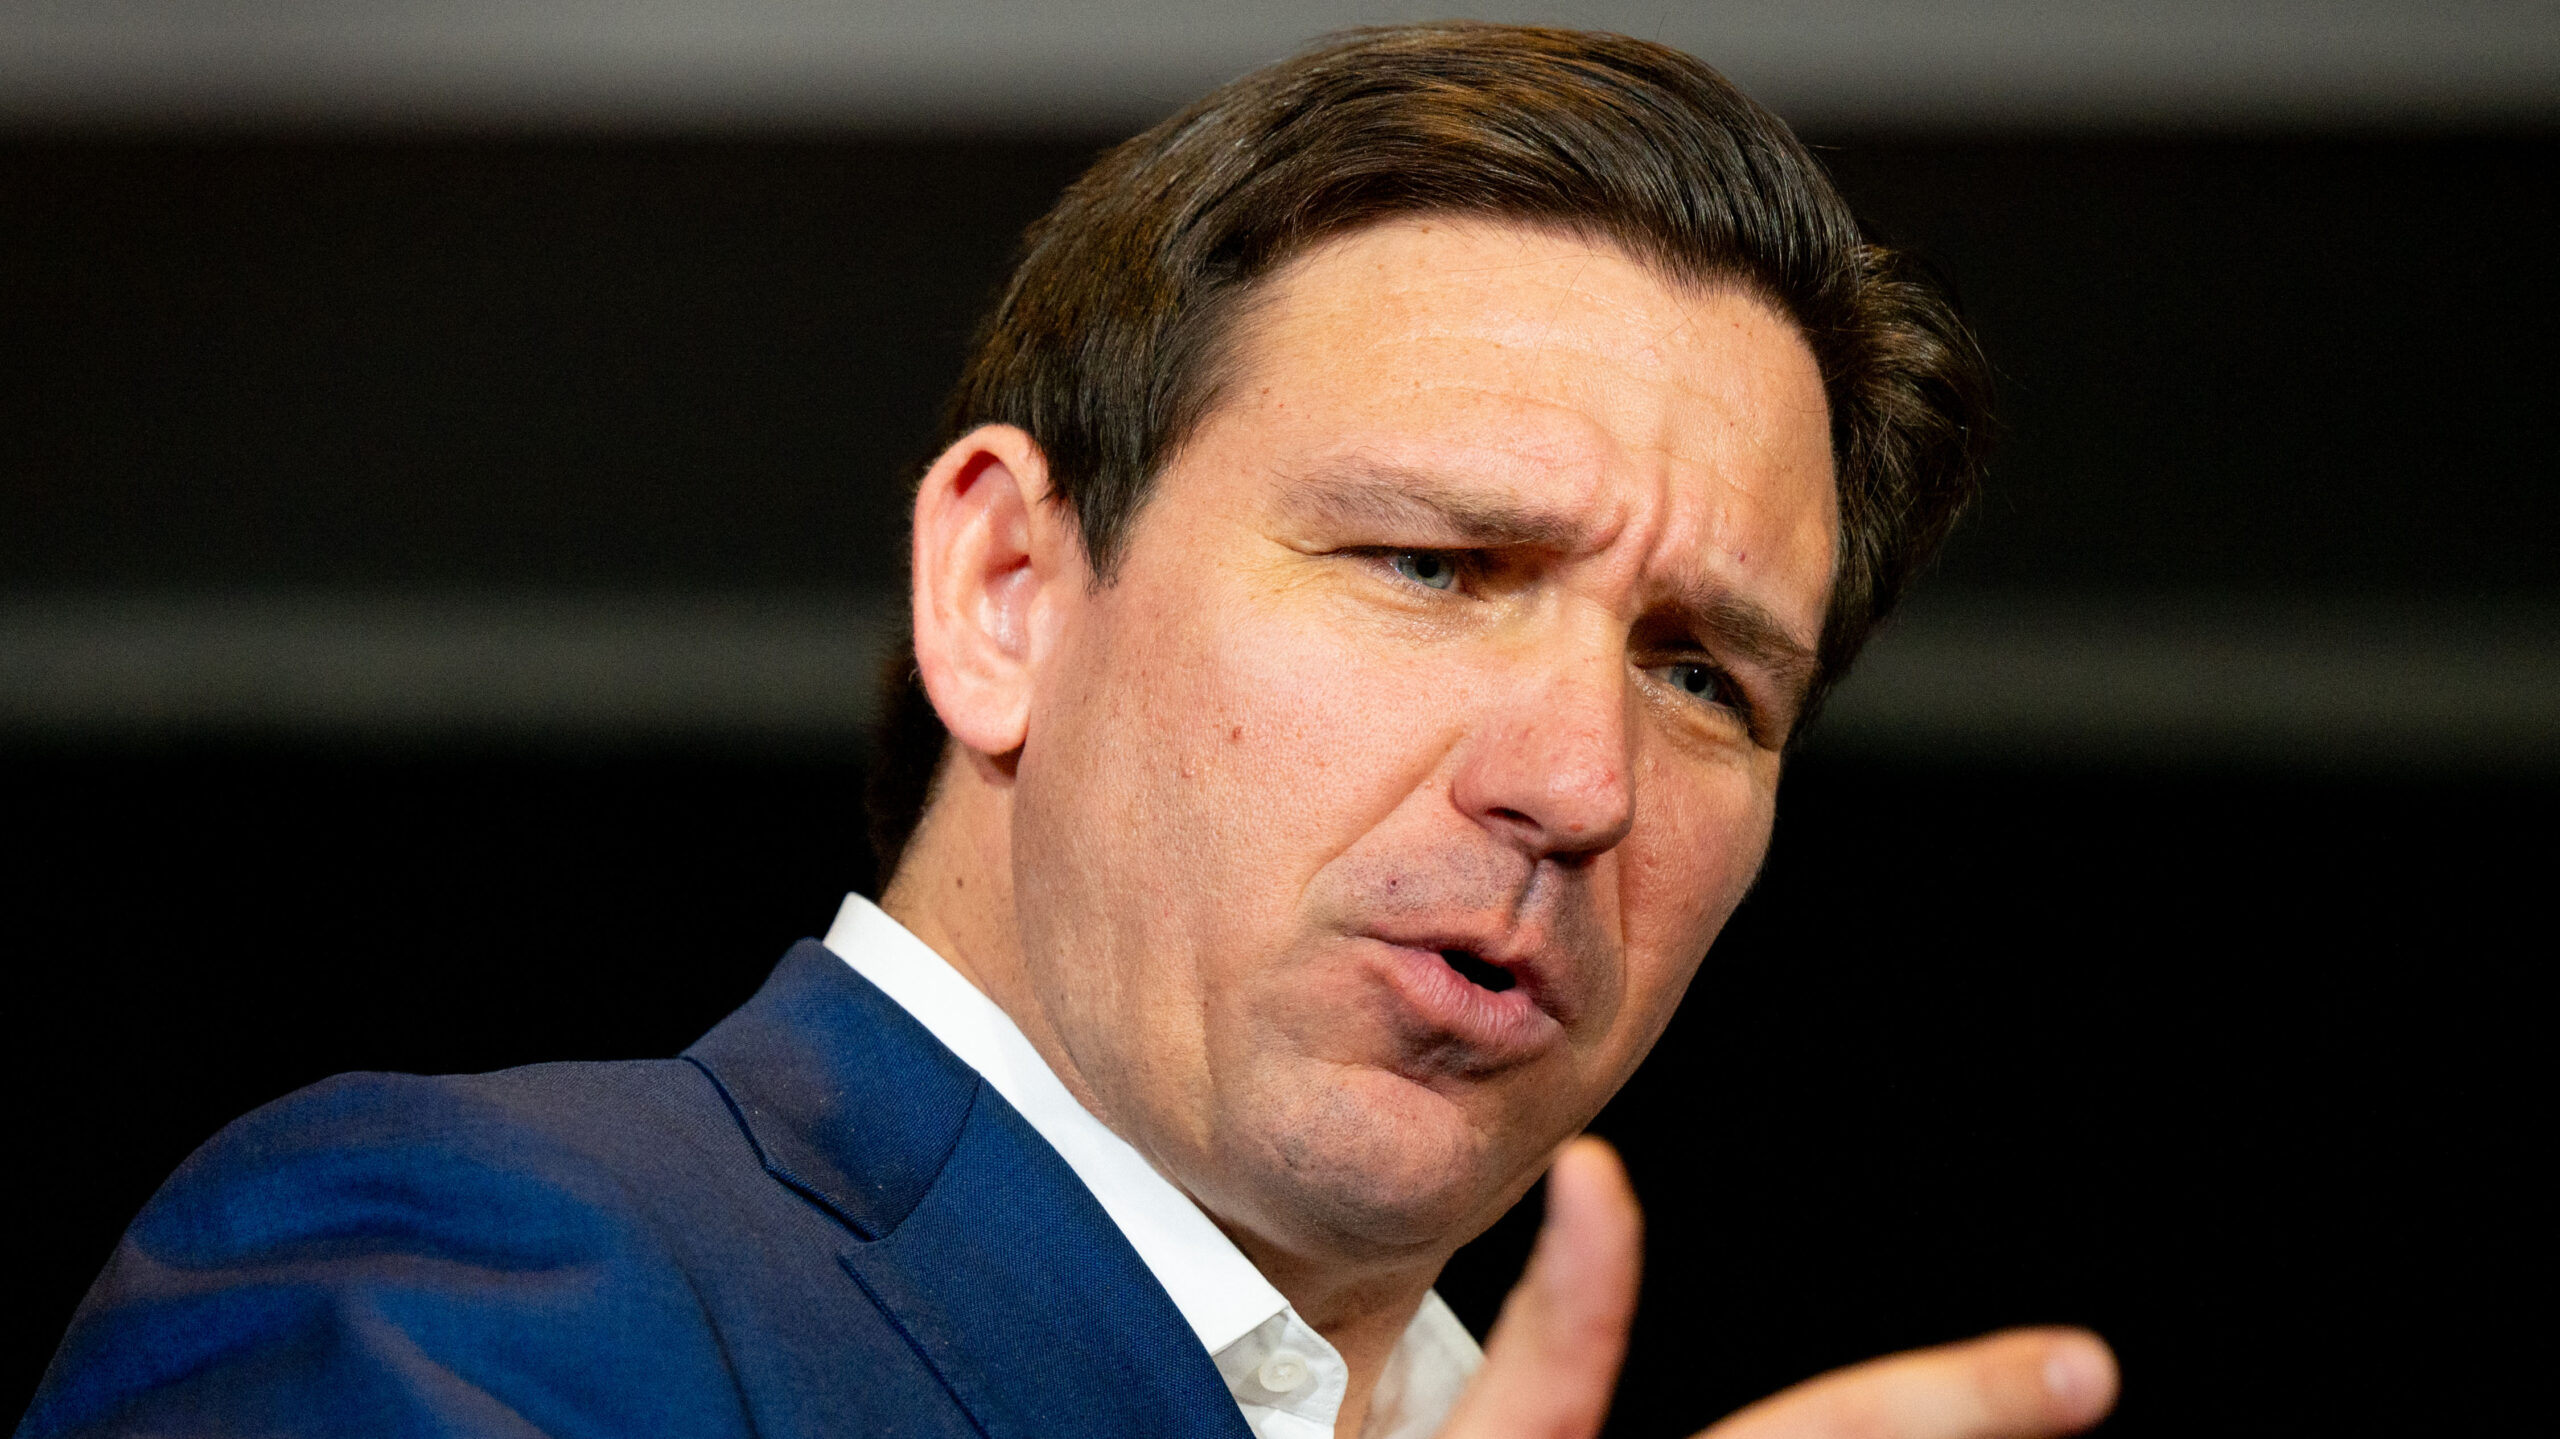 DeSantis Slams Democrats Following Killing Of NYPD Officer: ‘They Embrace The Criminal Element’